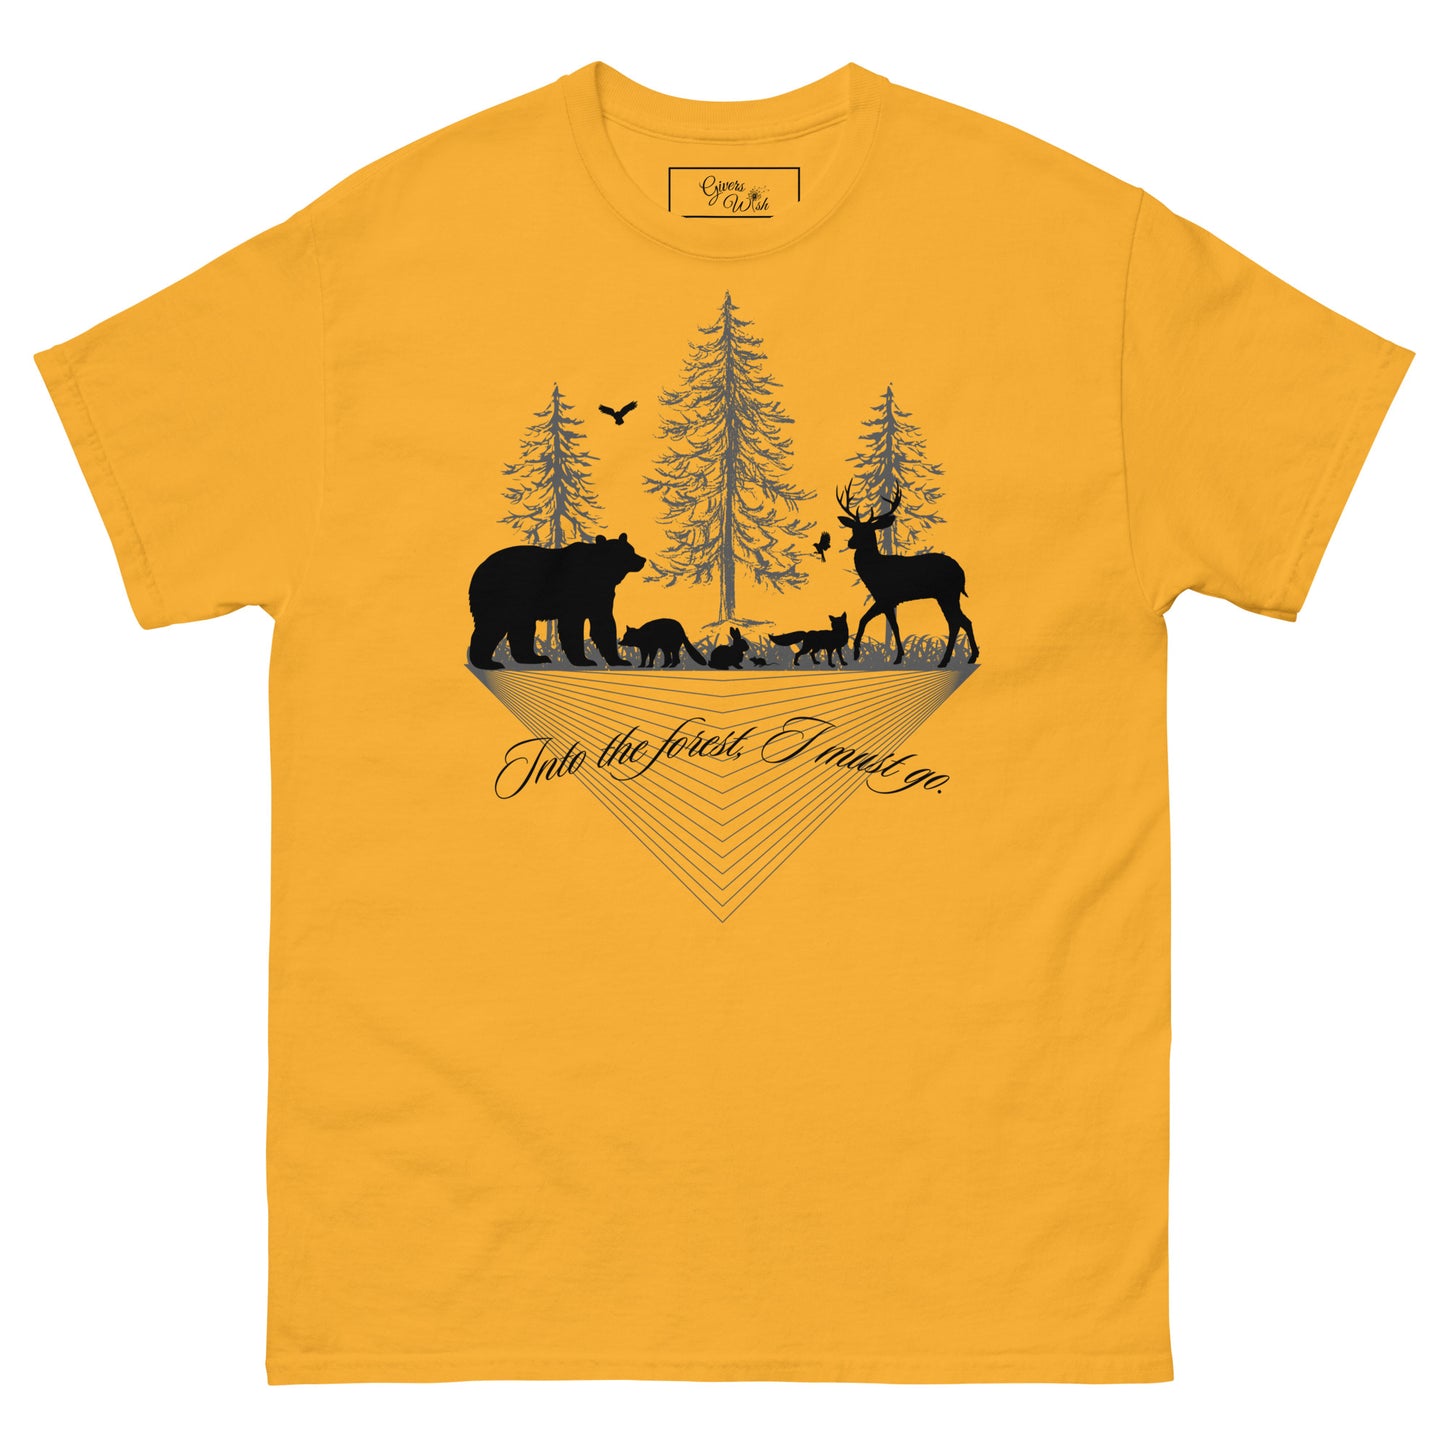 Unisex classic tee Into the forest